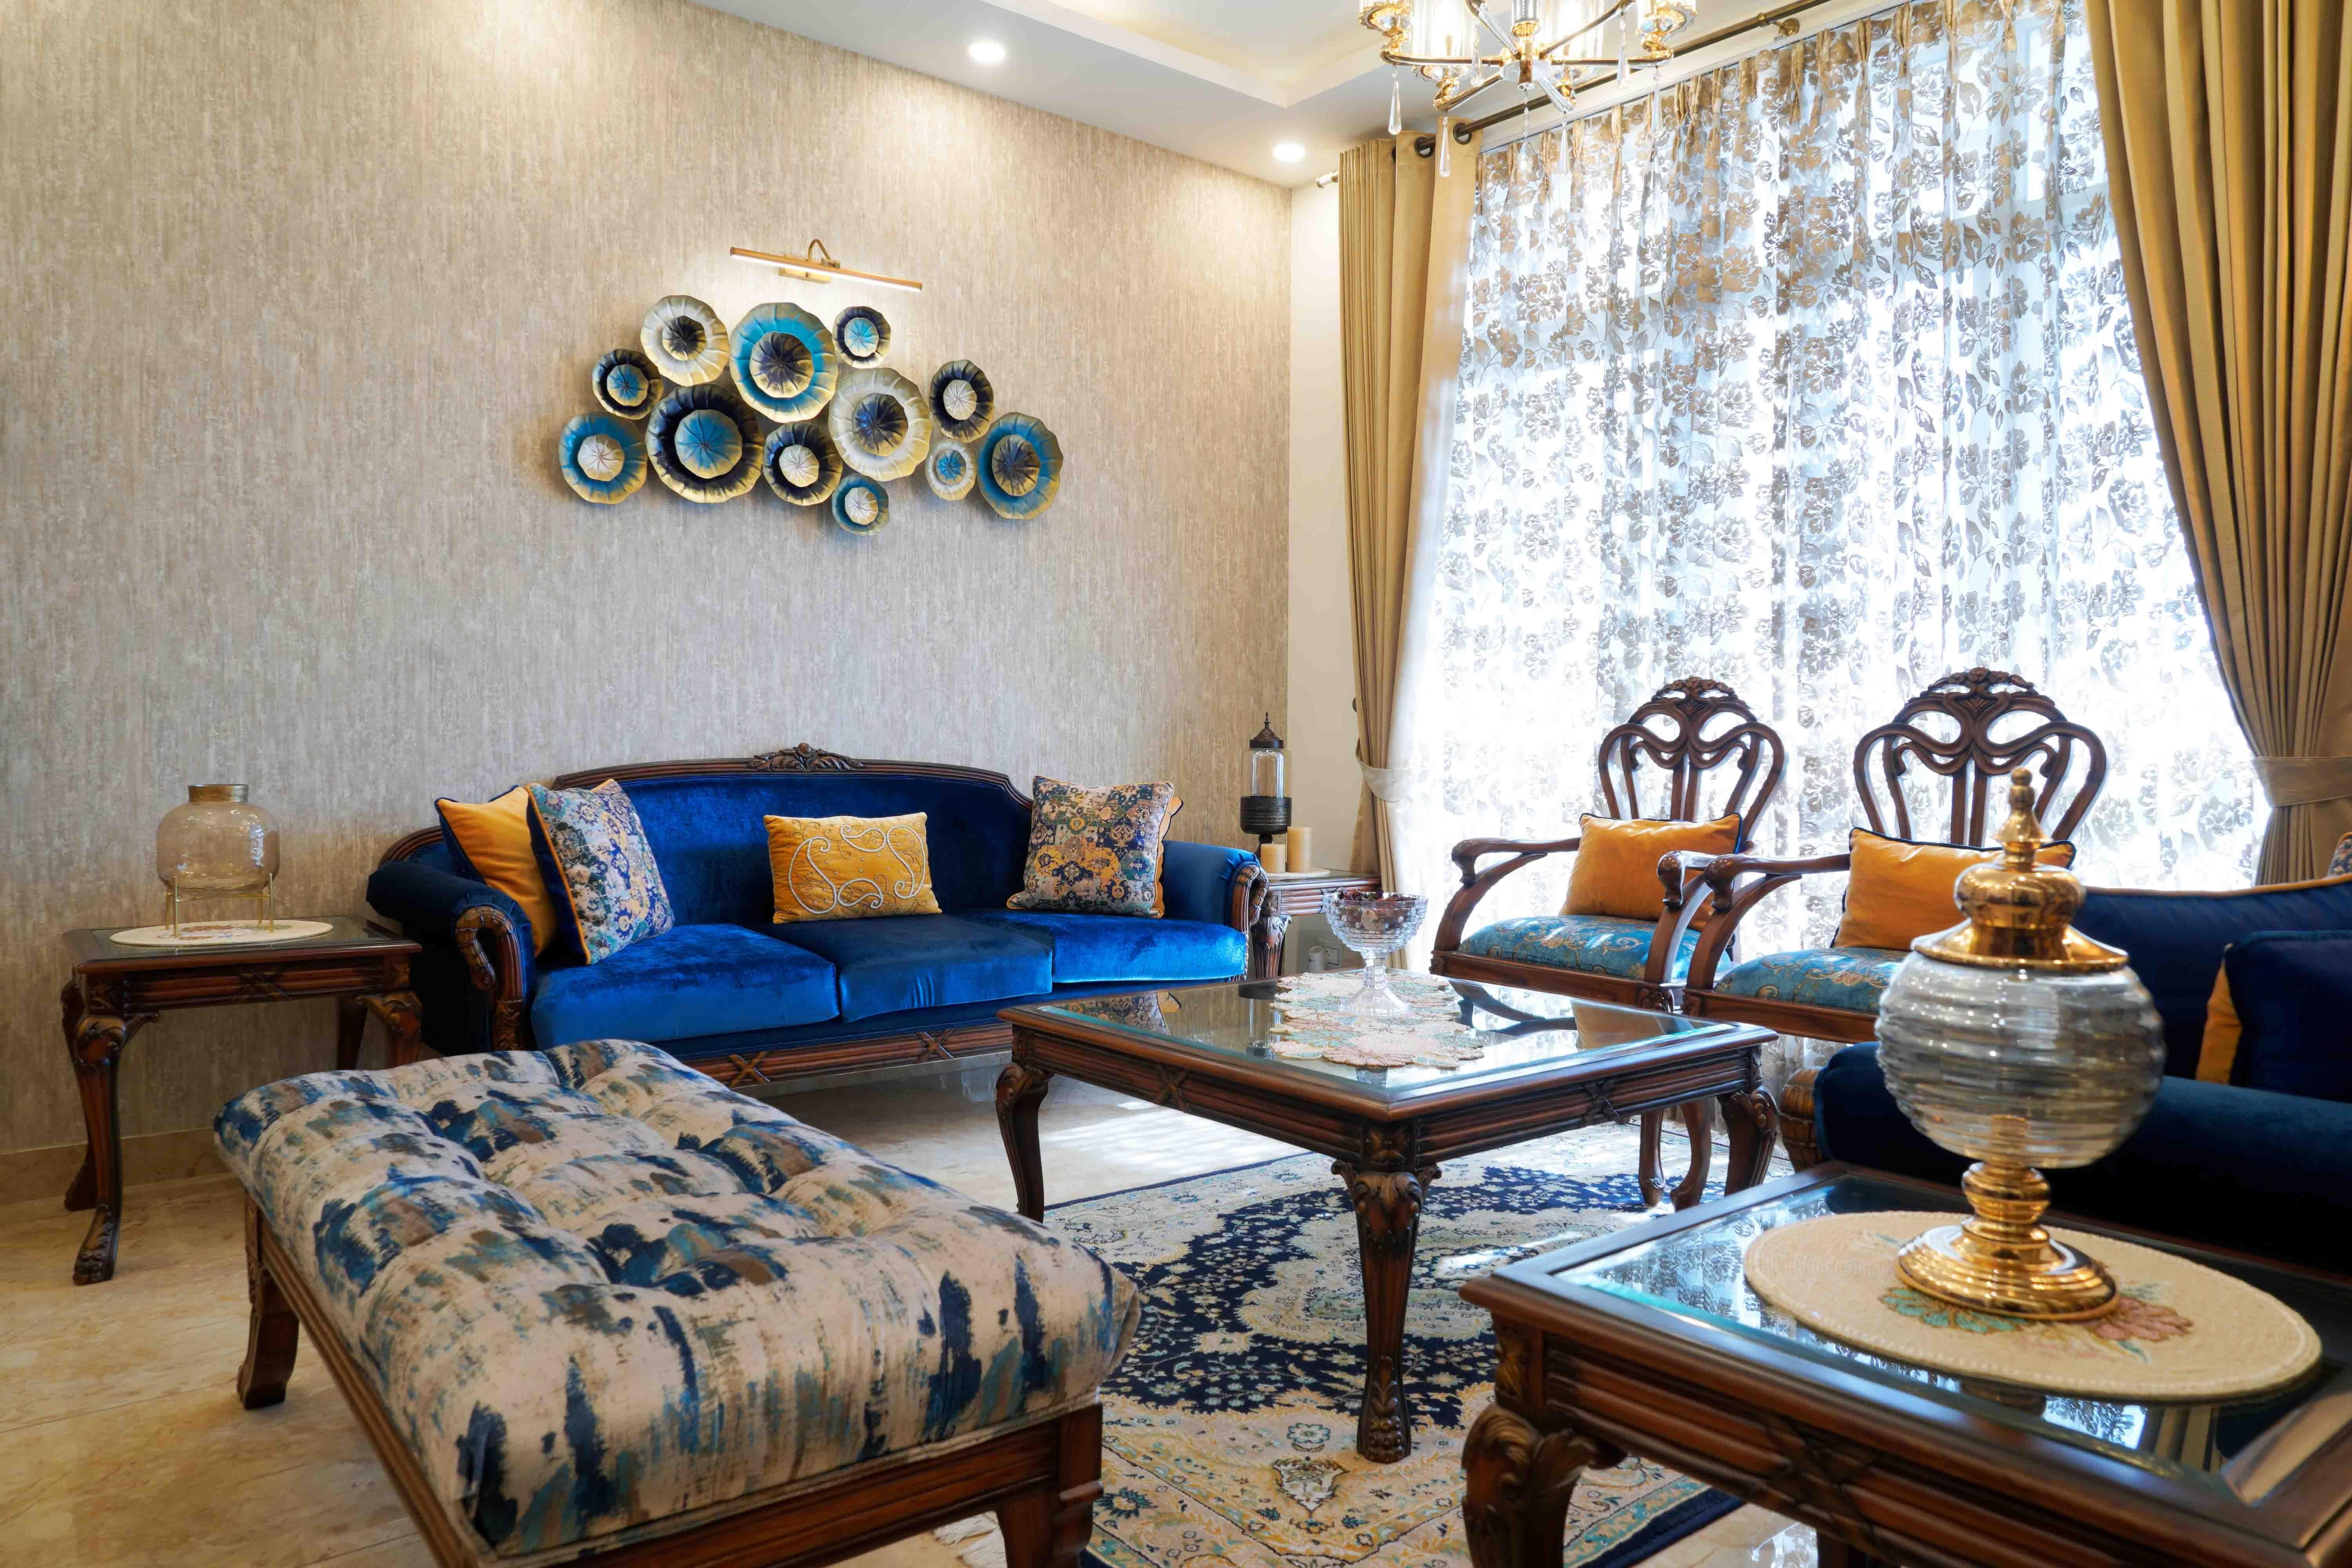 Contemporary 3-BHK Flat In Gurgaon With White Guest Room And Floral Wallpaper